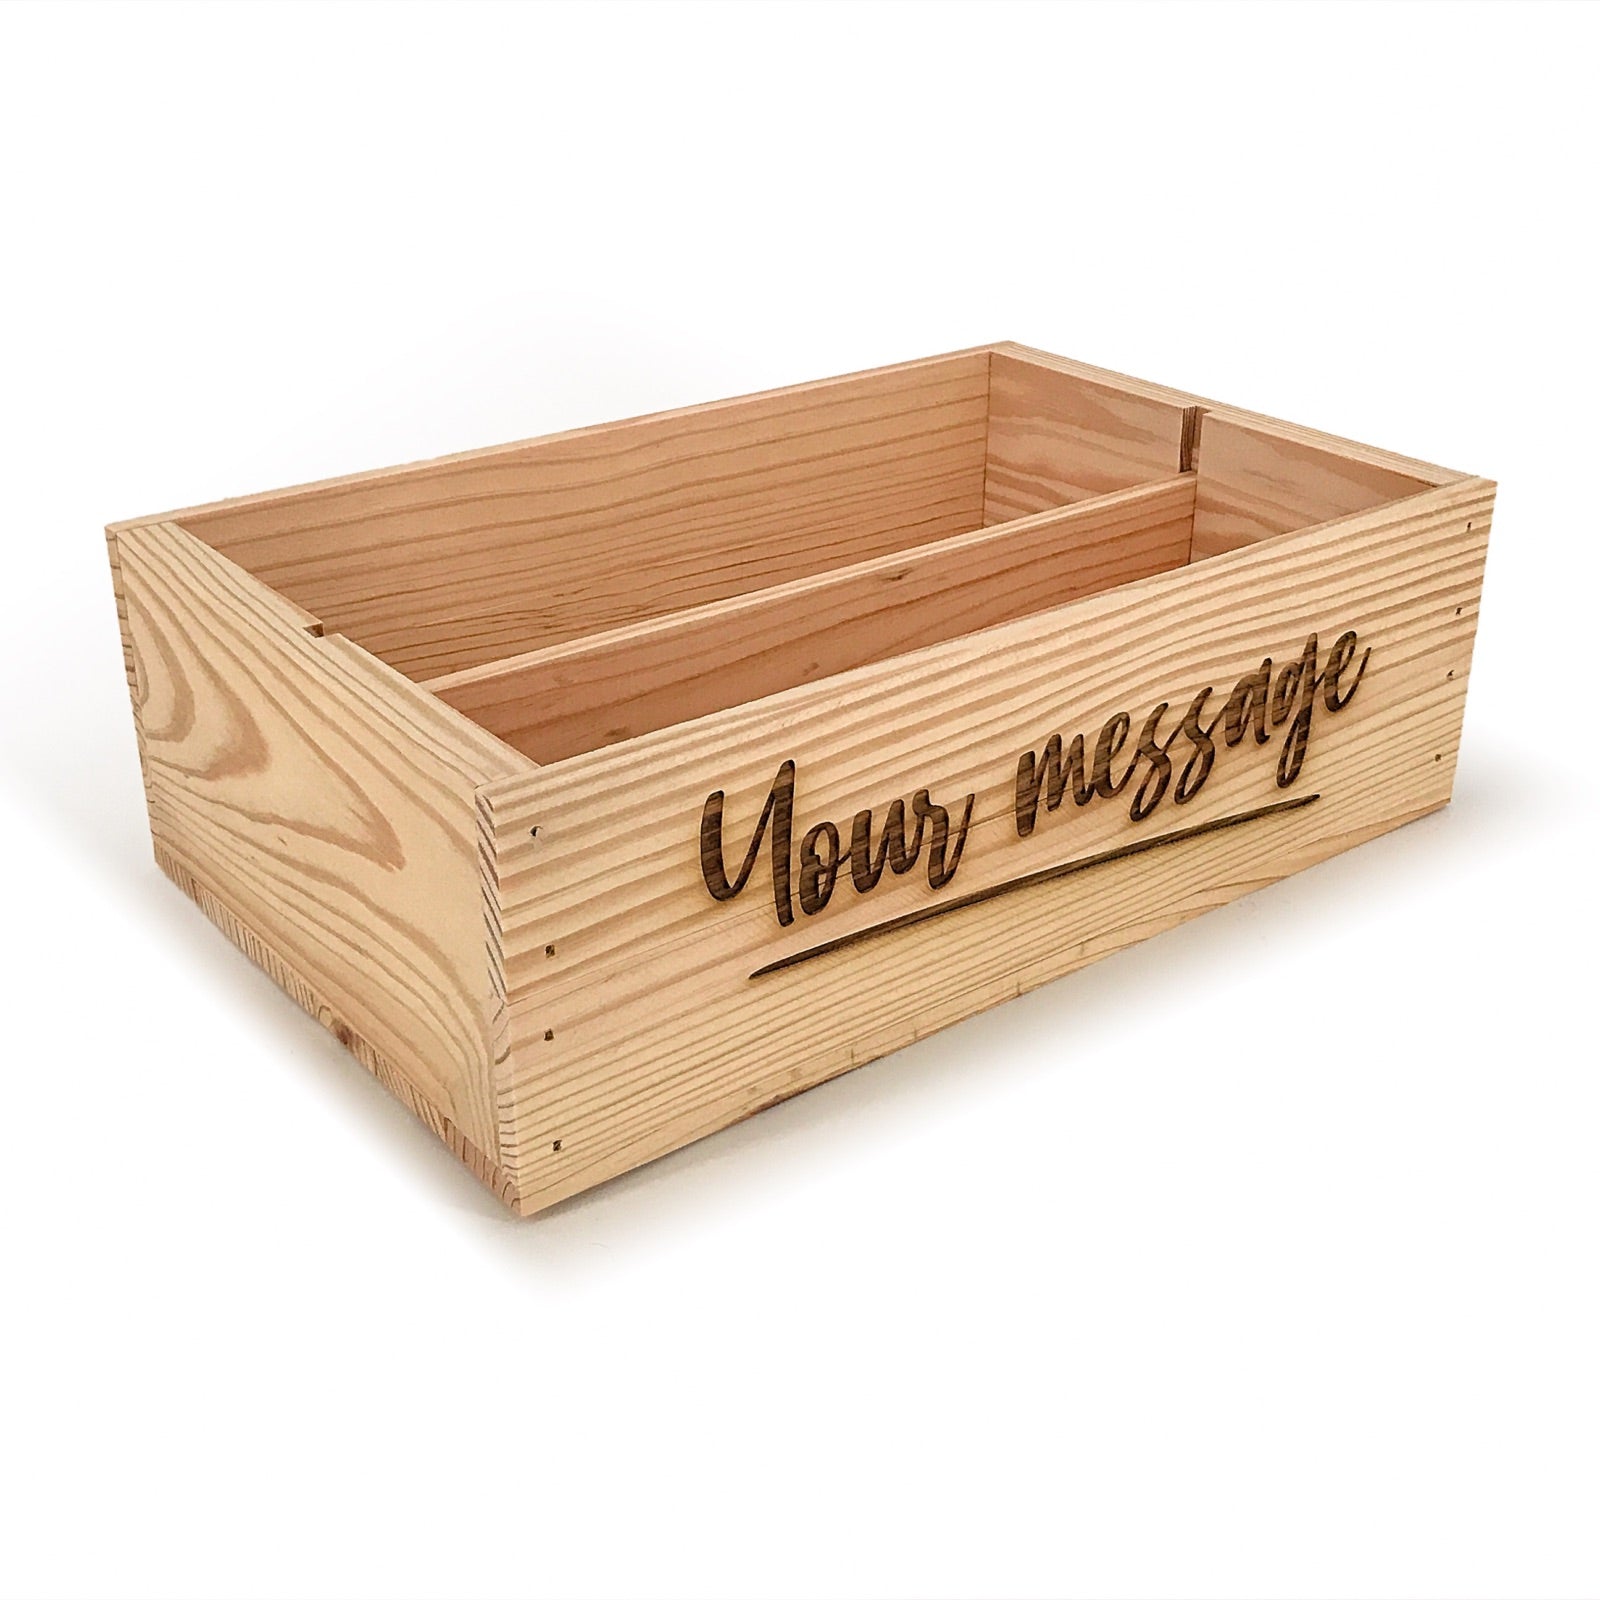 Two Bottle Wine Crate Boxes with Custom Message 14x9x4.5, 6-WB-14-9-4.5-ST-NW-LL,  12-WB-14-9-4.5-ST-NW-LL,  24-WB-14-9-4.5-ST-NW-LL,  48-WB-14-9-4.5-ST-NW-LL,  96-WB-14-9-4.5-ST-NW-LL